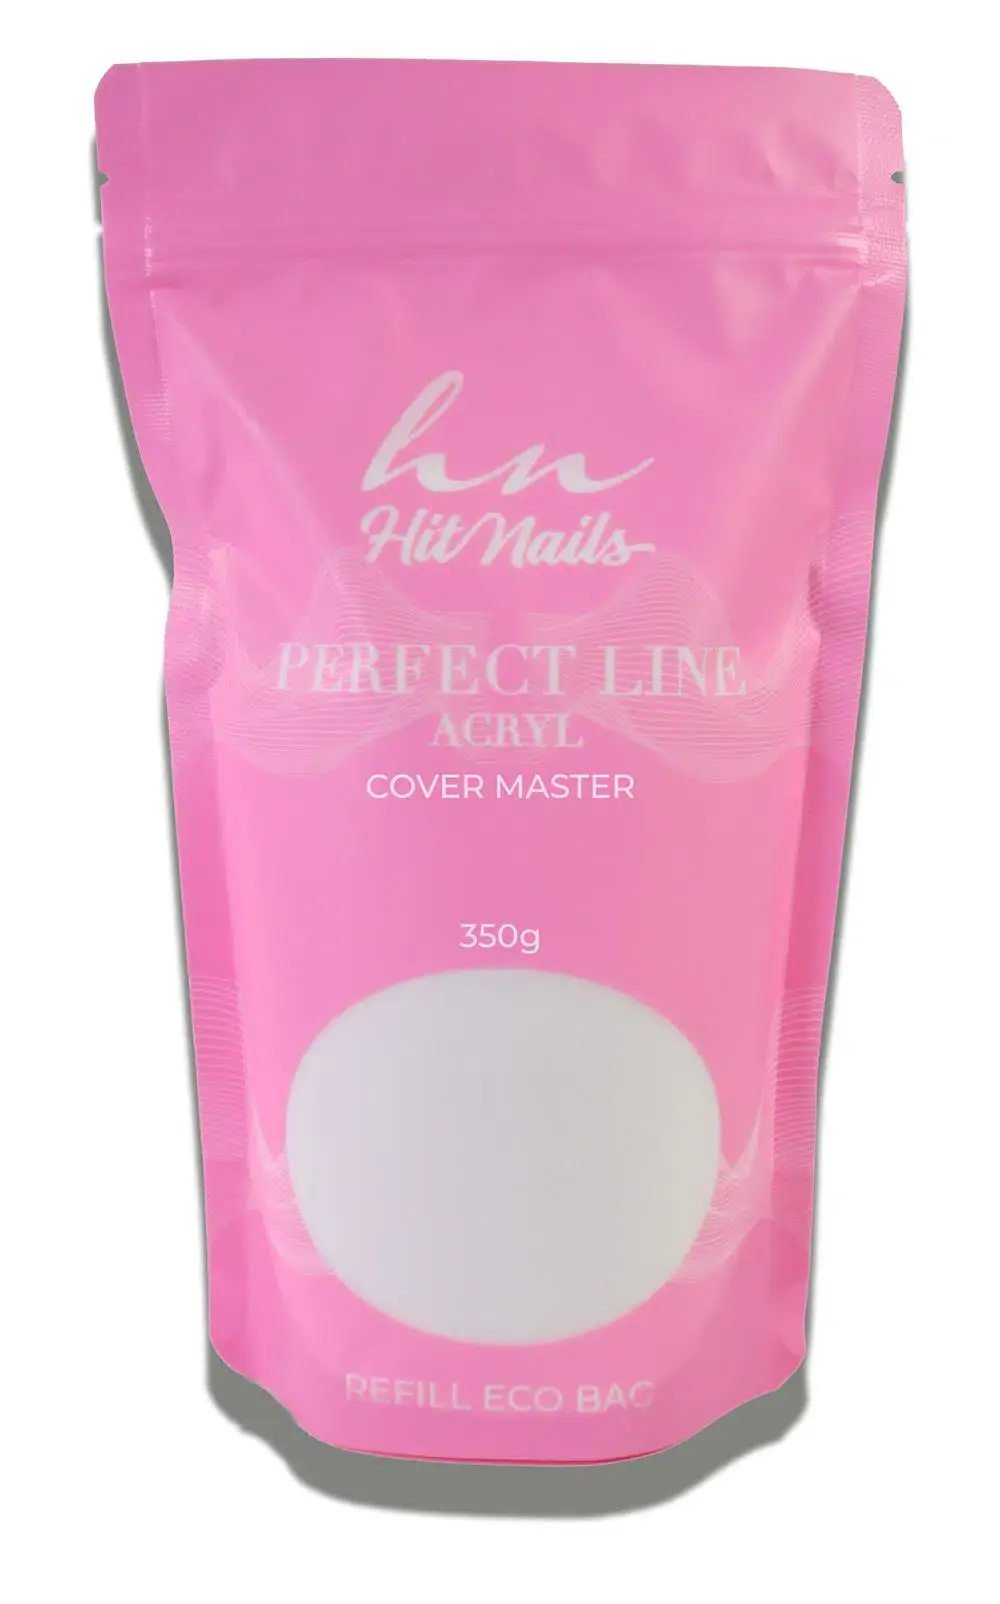 Perfect Line - Acryl - Cover Master 350g Refill